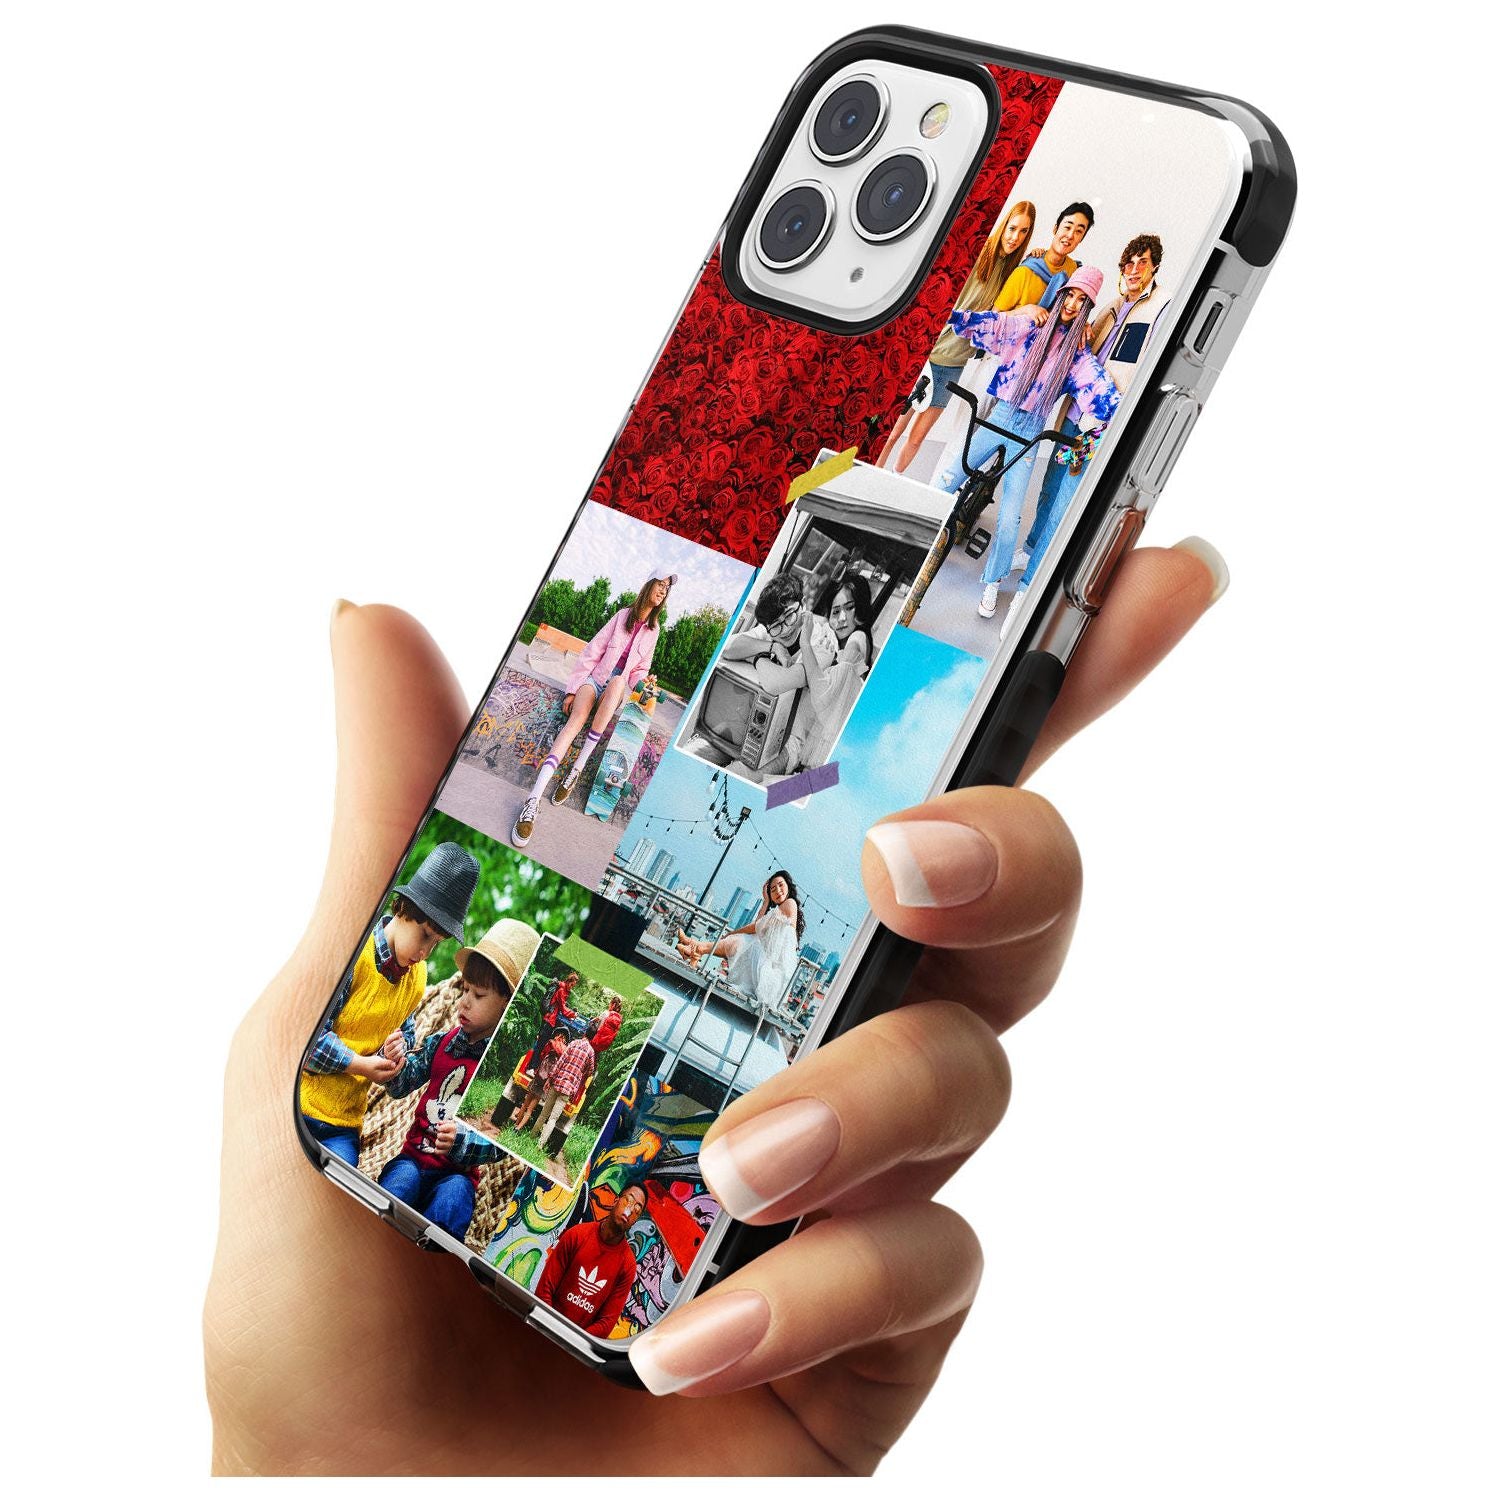 Personalised Photo Collage Black Impact Phone Case for iPhone 11